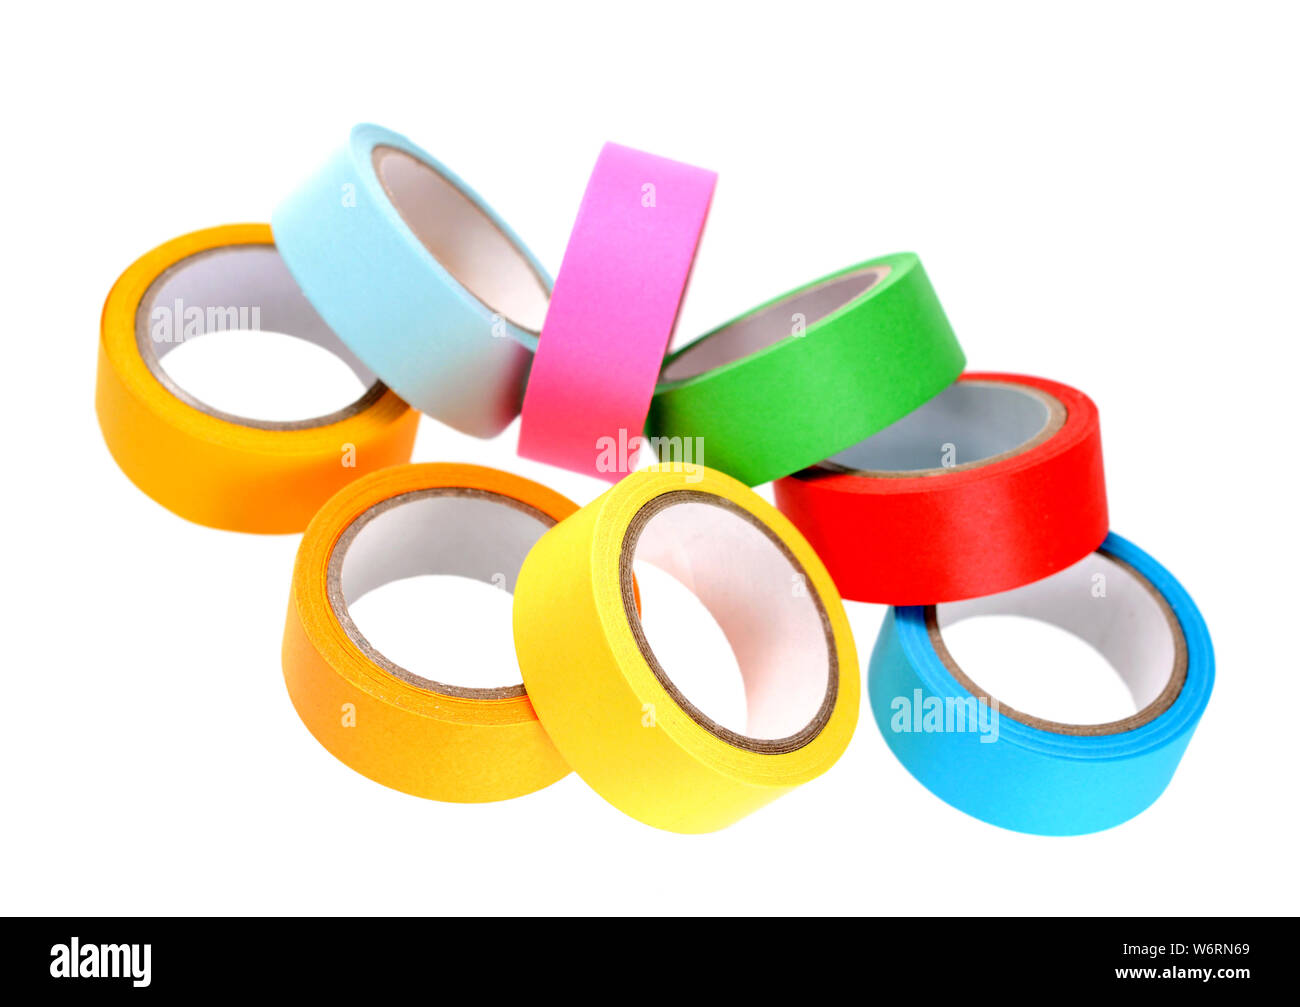 Colorful tape rolls stock image. Image of packing, tape - 34309507